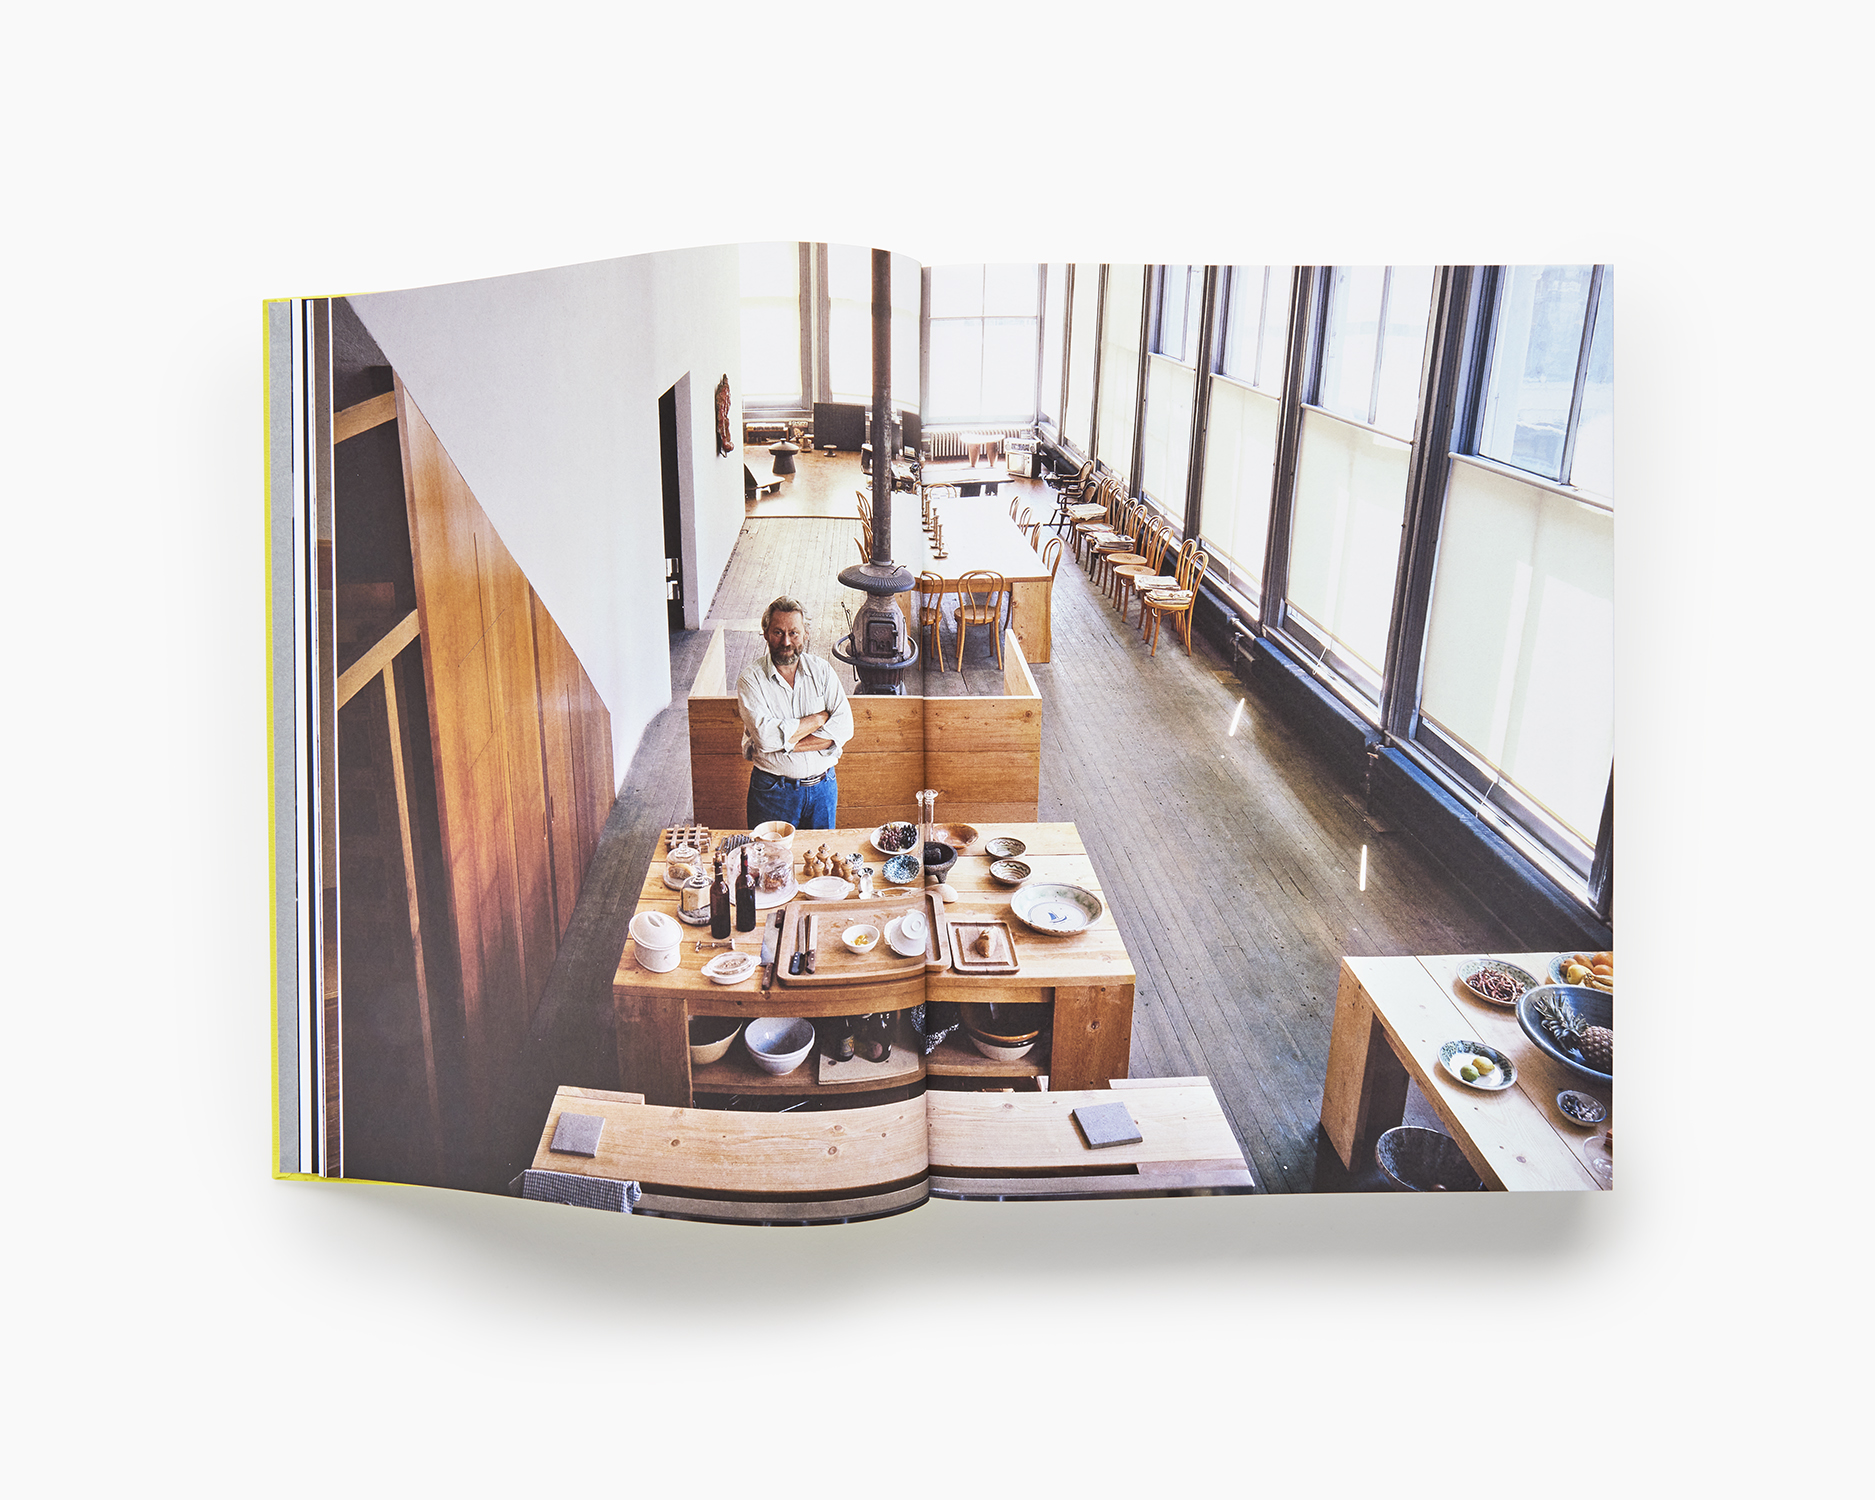 Judd Foundation publishes first photo book: Donald Judd Spaces